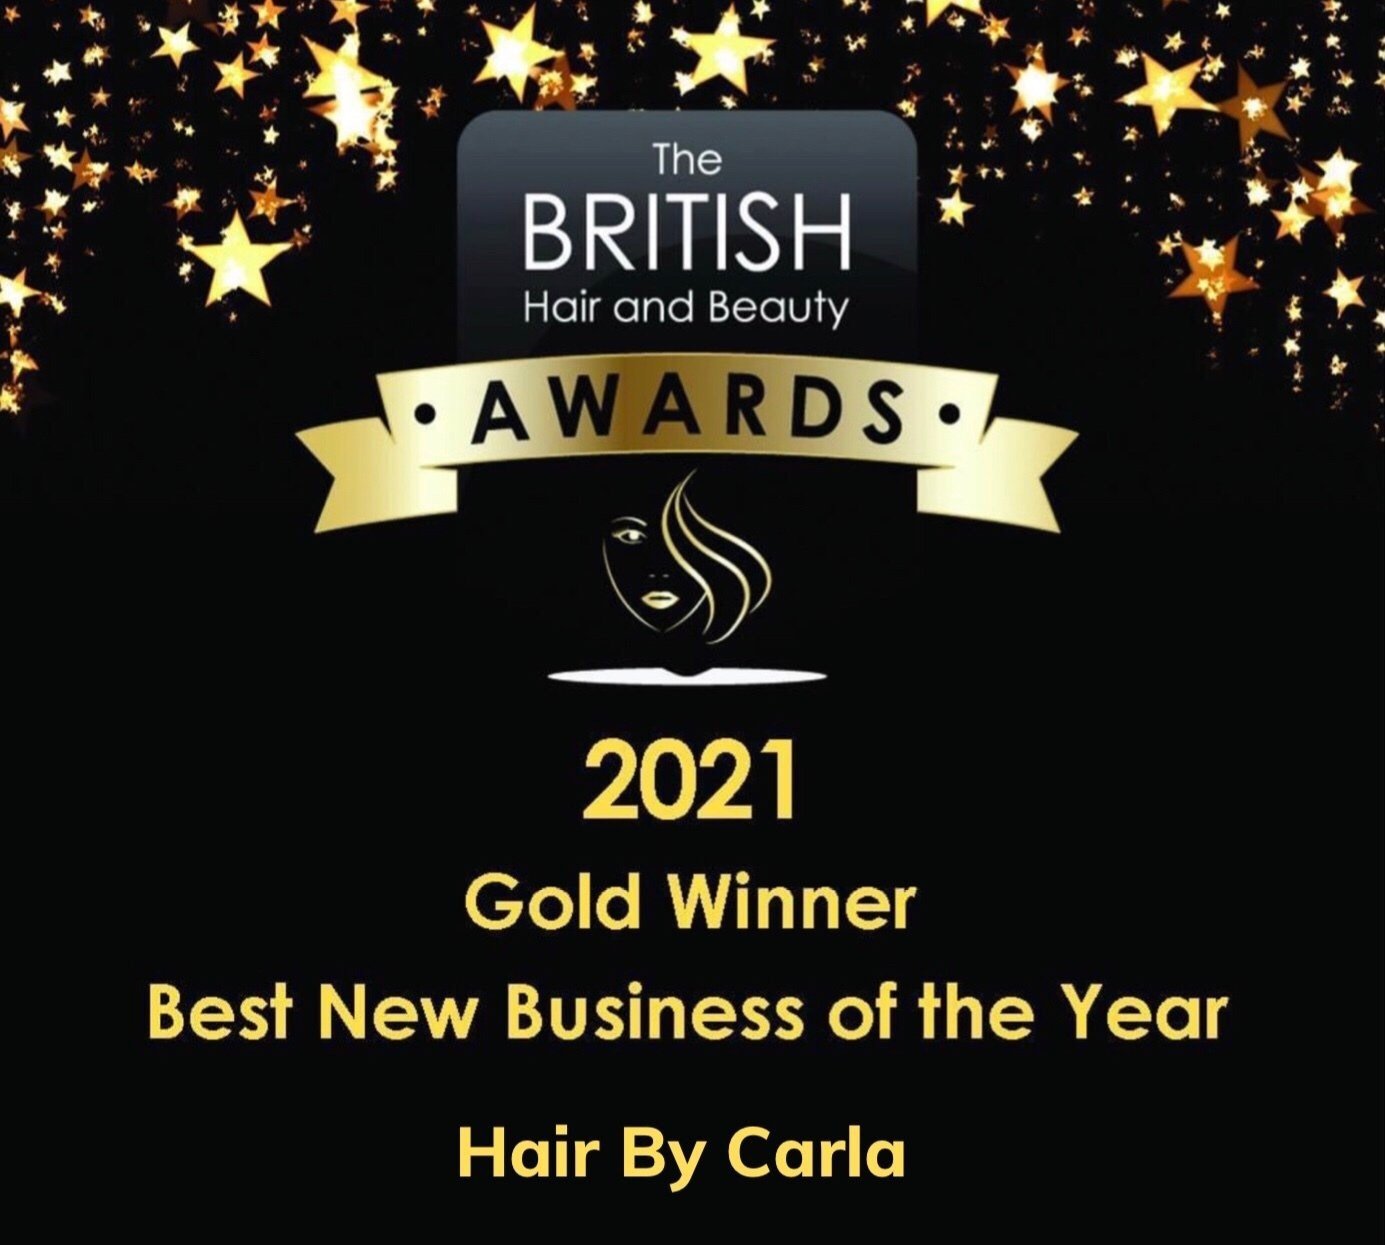 The BRITISH Hair and Beauty Awards